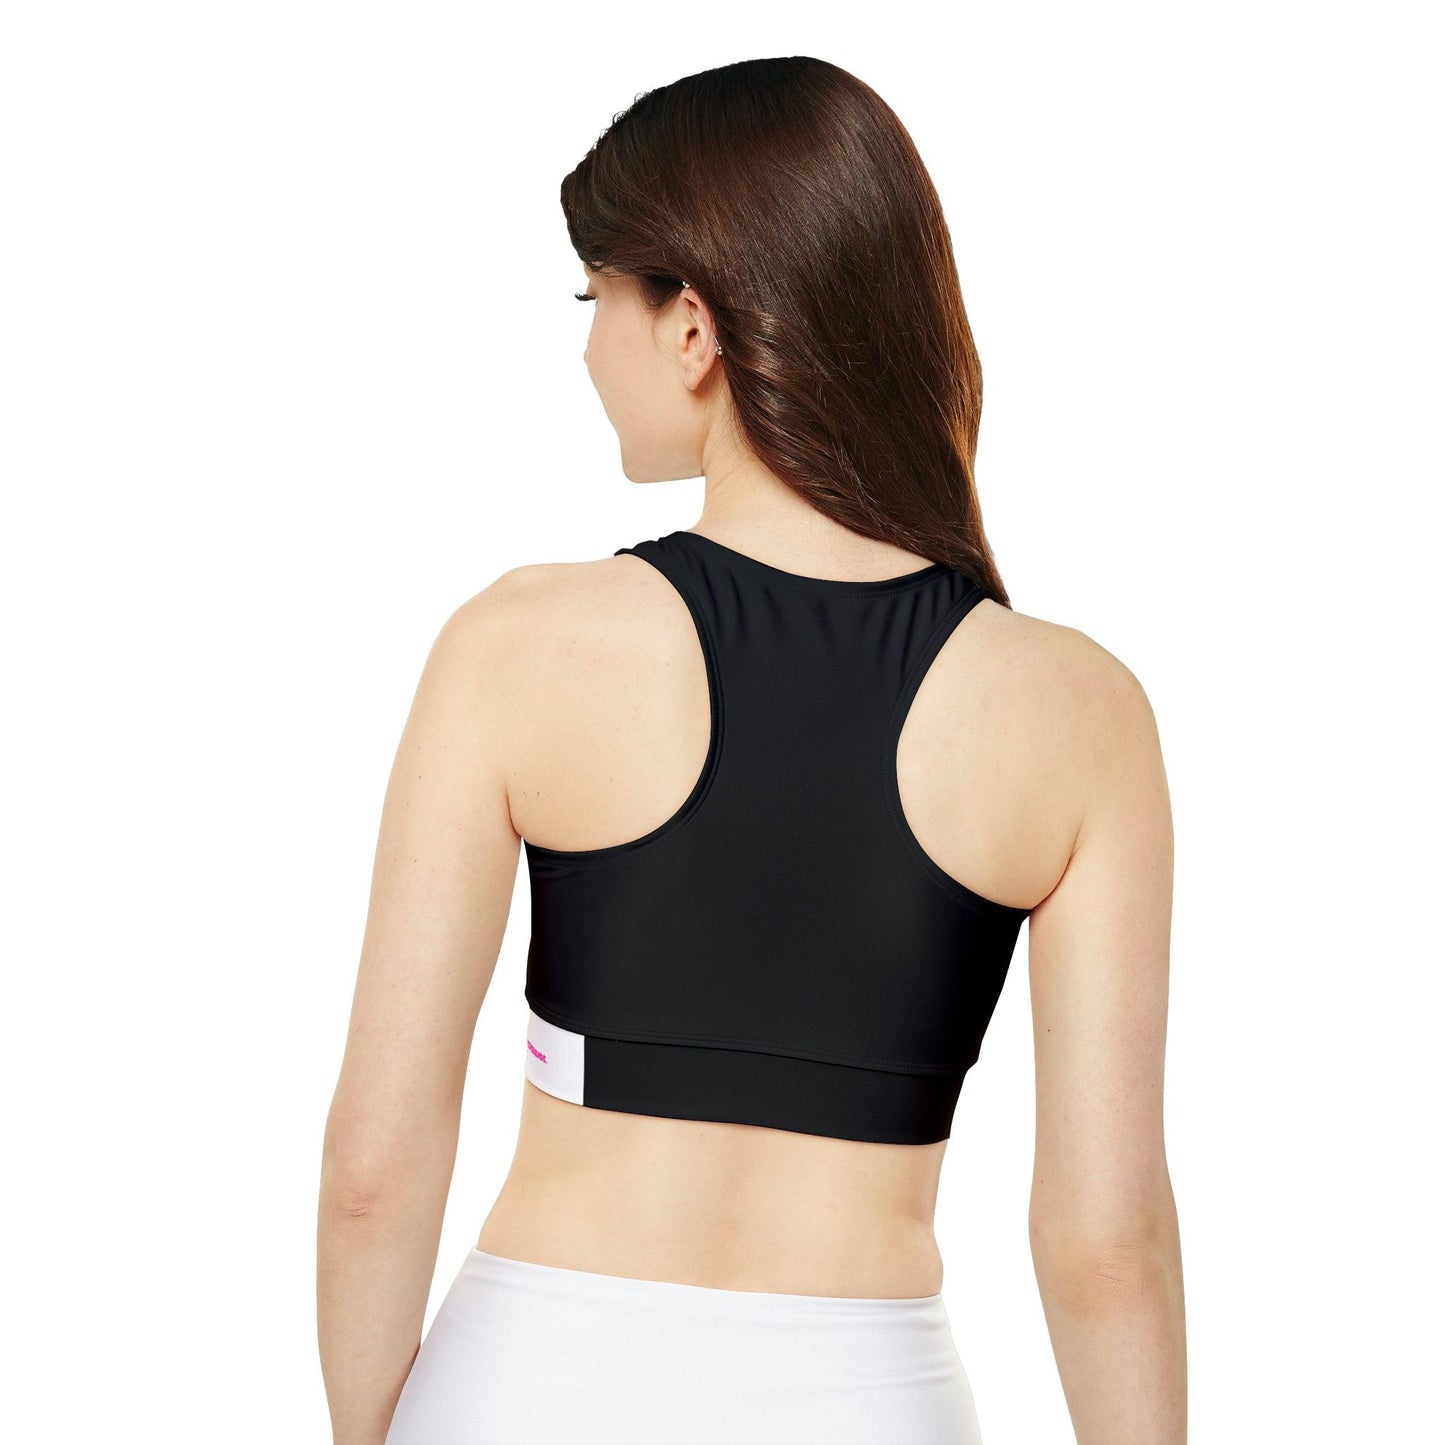 Fully Lined, Lifestyle Padded Sports Bra - COFFEEBRE